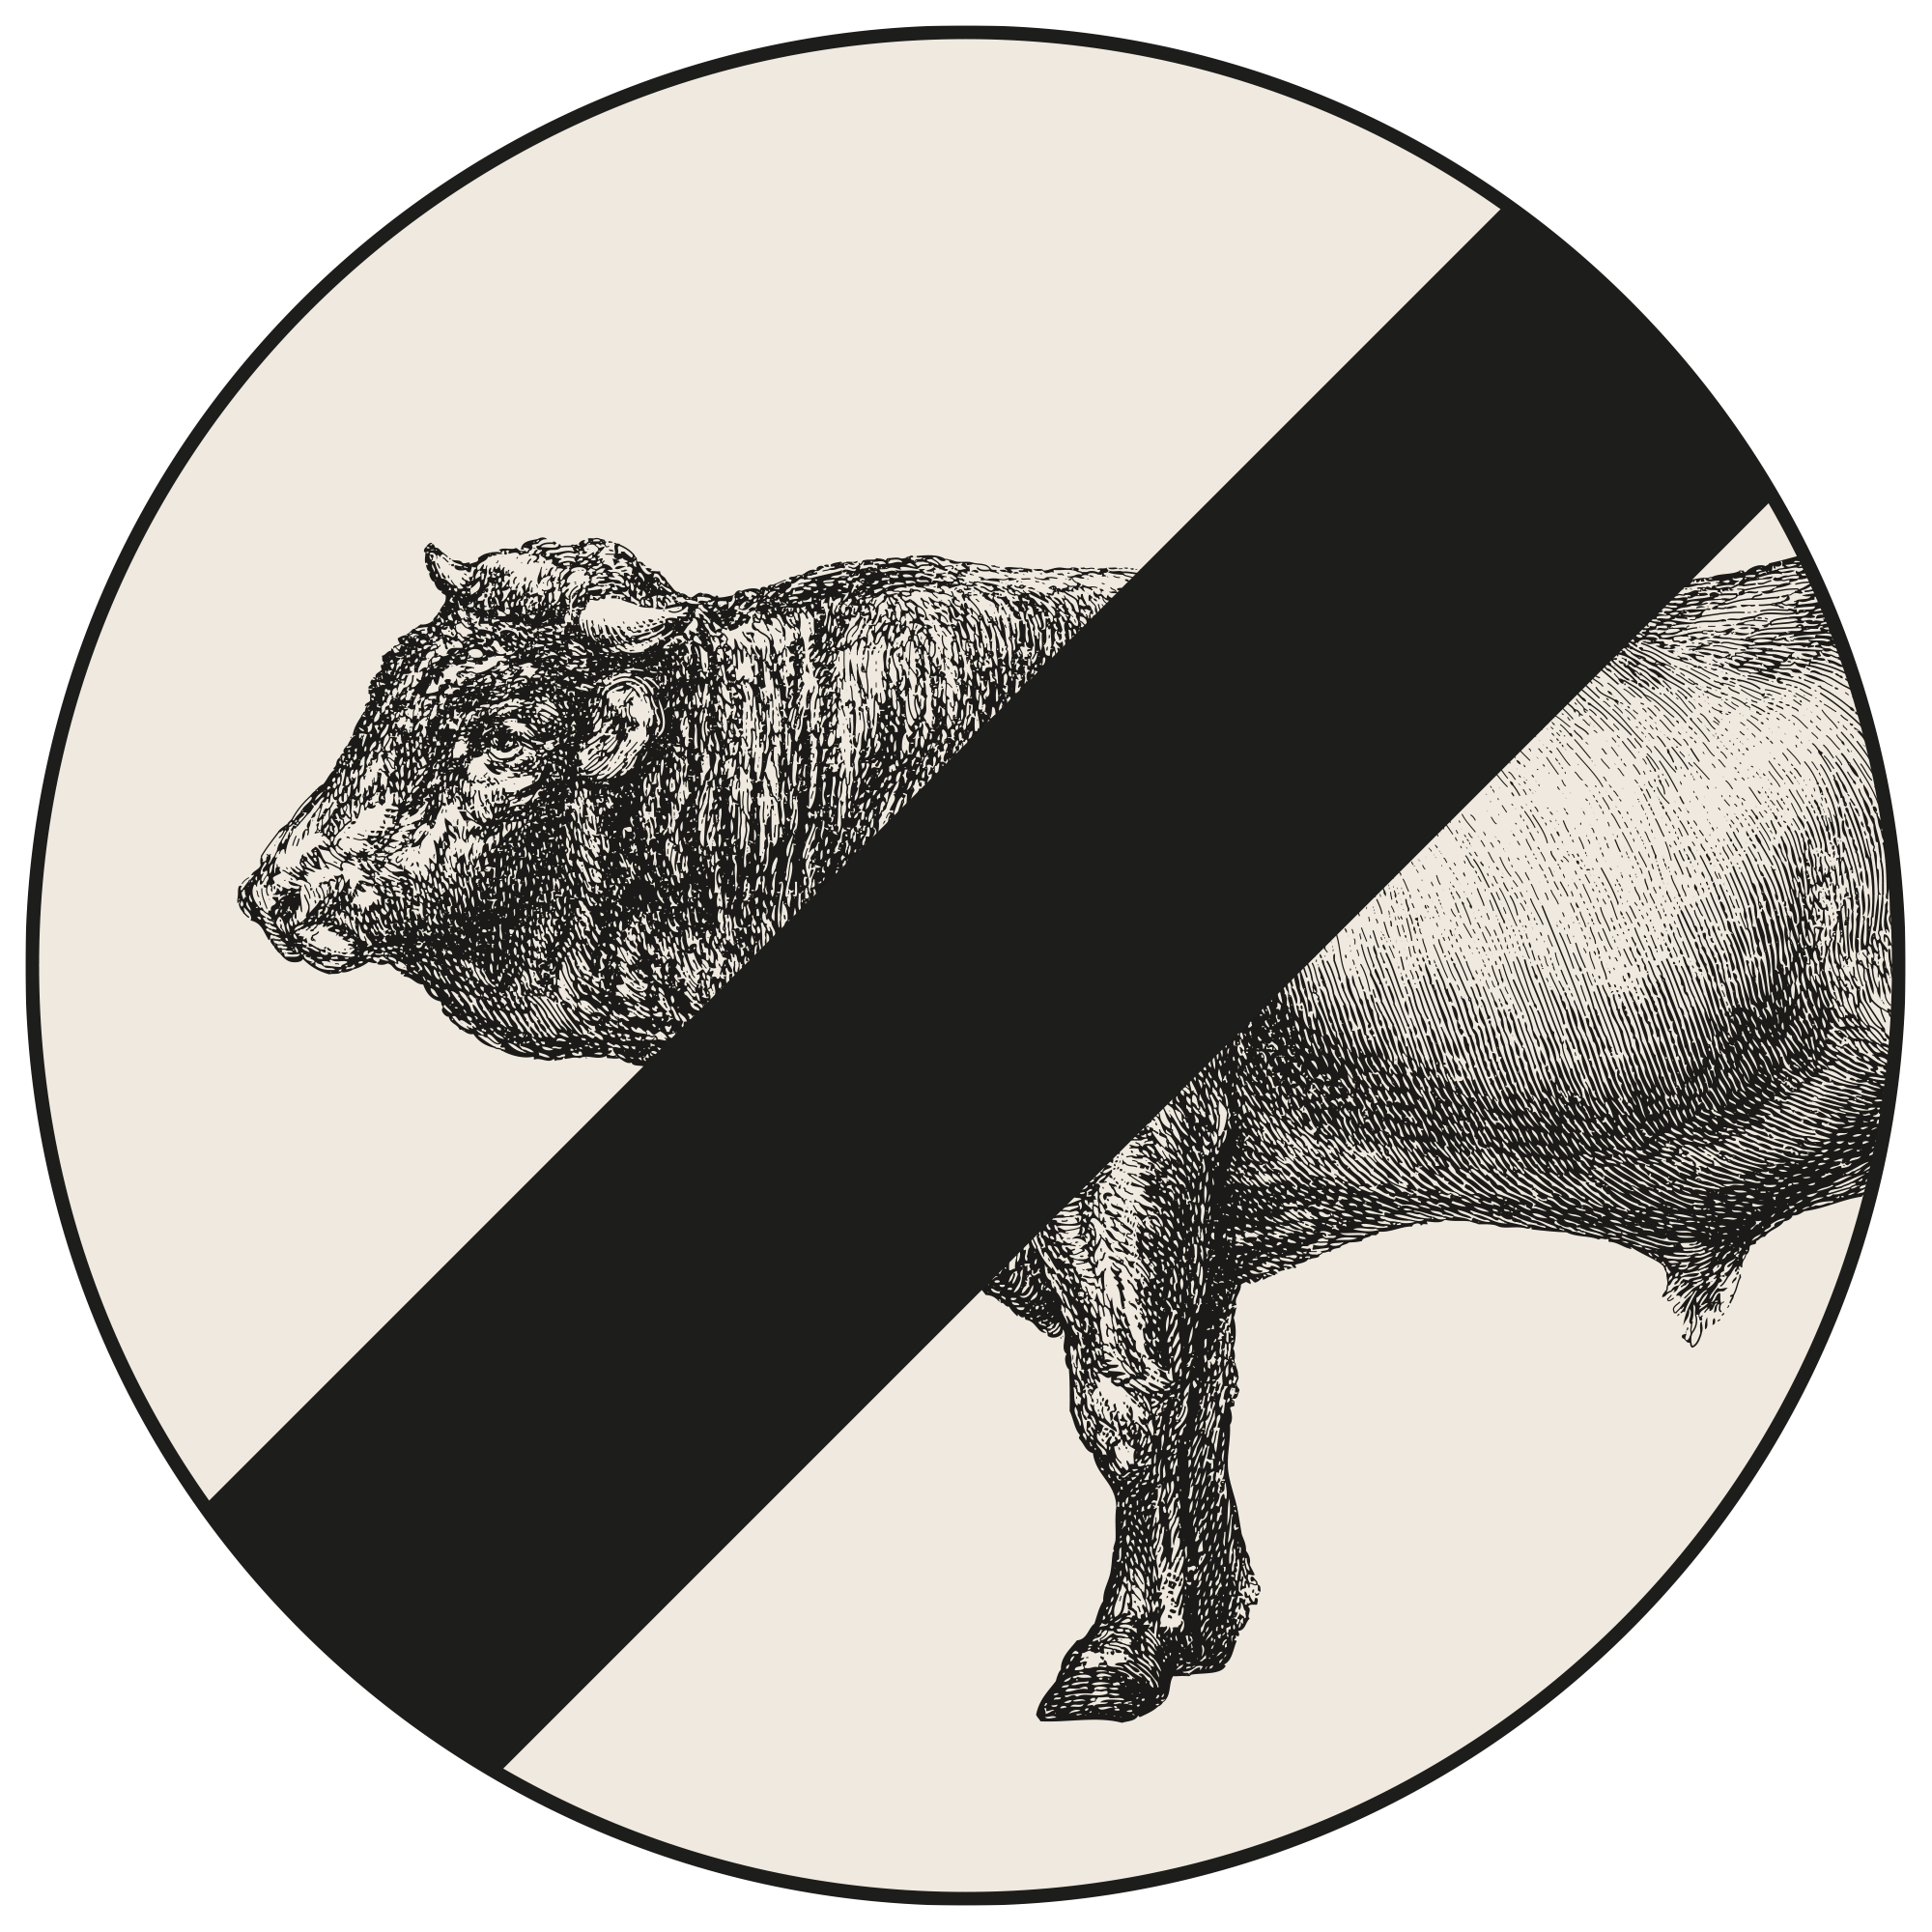 The Vital Bull. The bull is hand drawn in black and white and features a black diagonal bar over it.